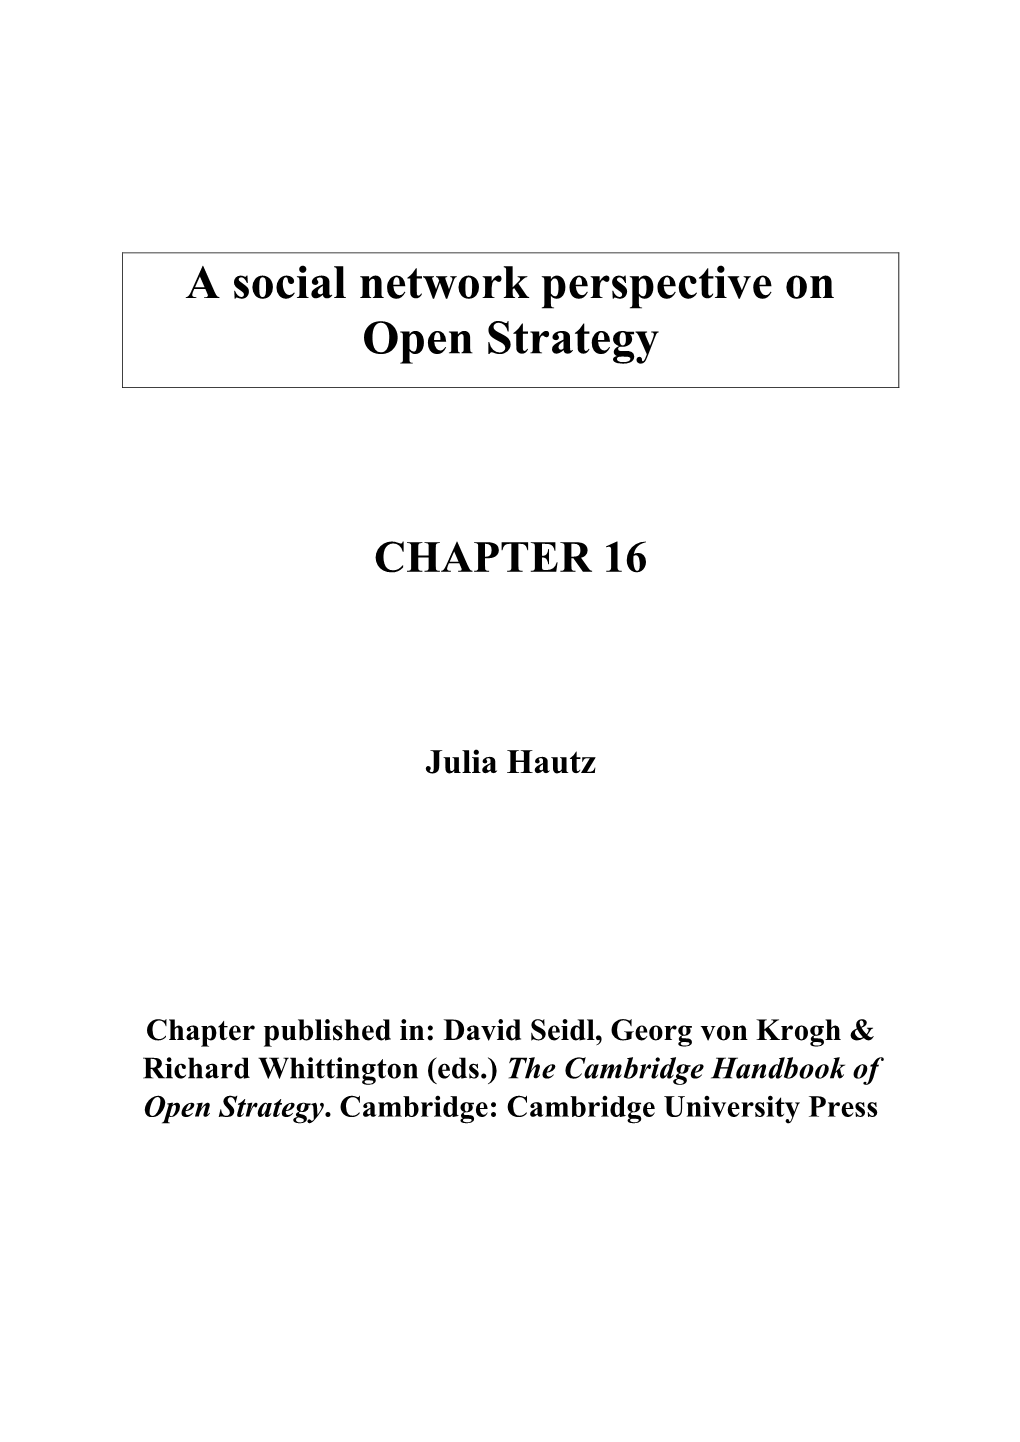 A Social Network Perspective on Open Strategy